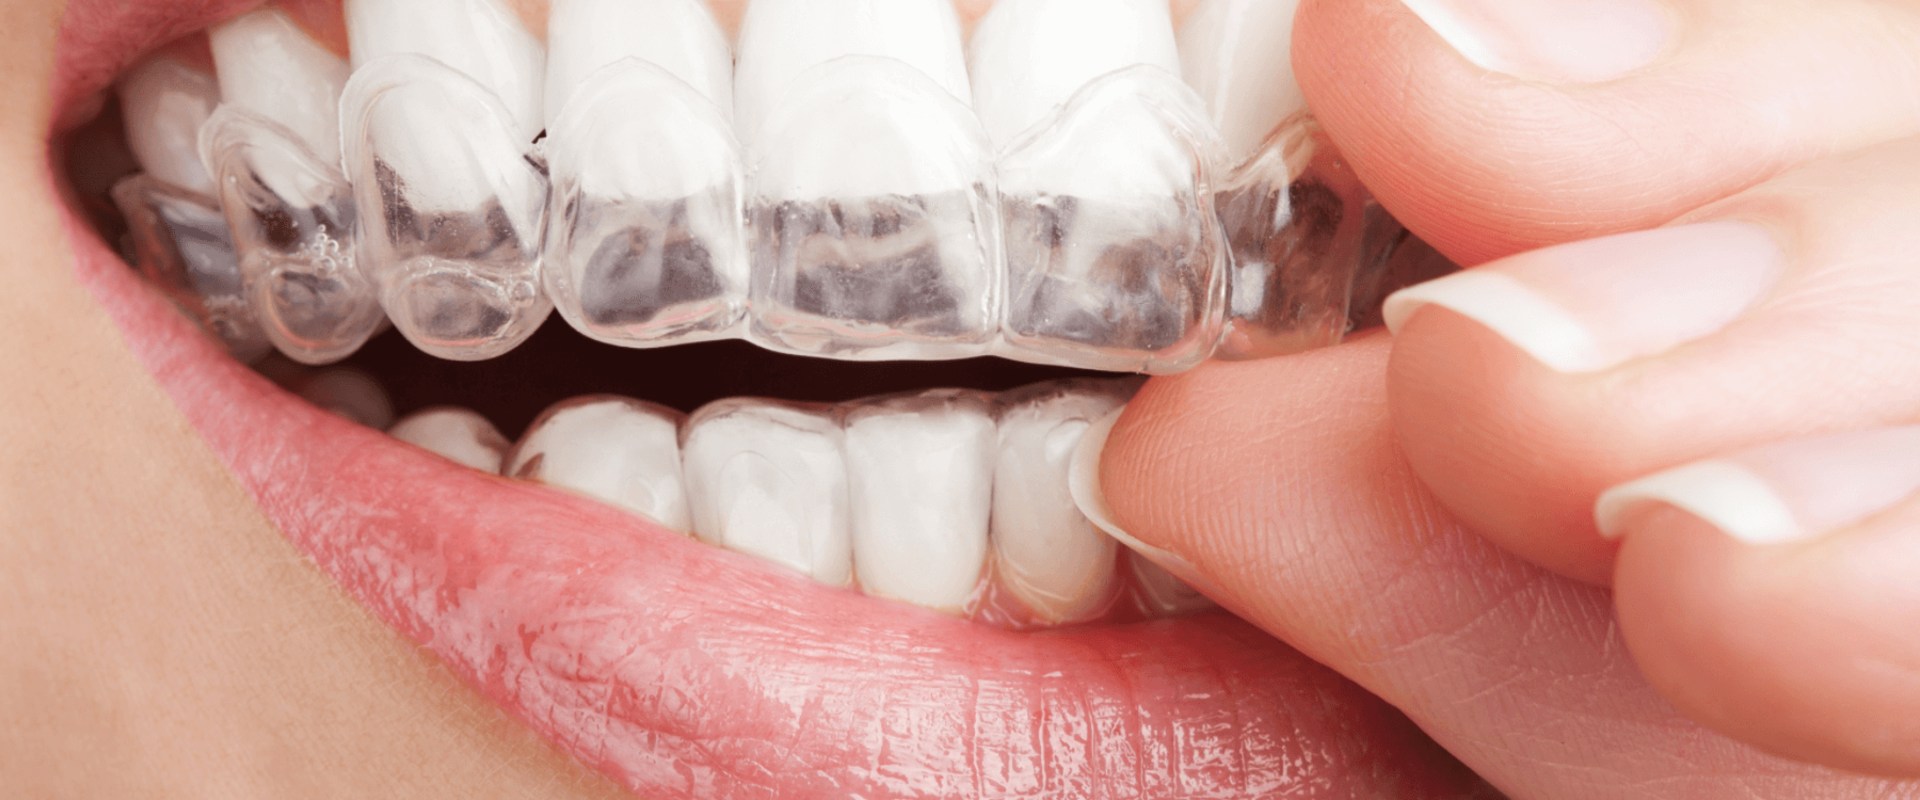 Reasons to Choose Invisalign Over Other Treatments